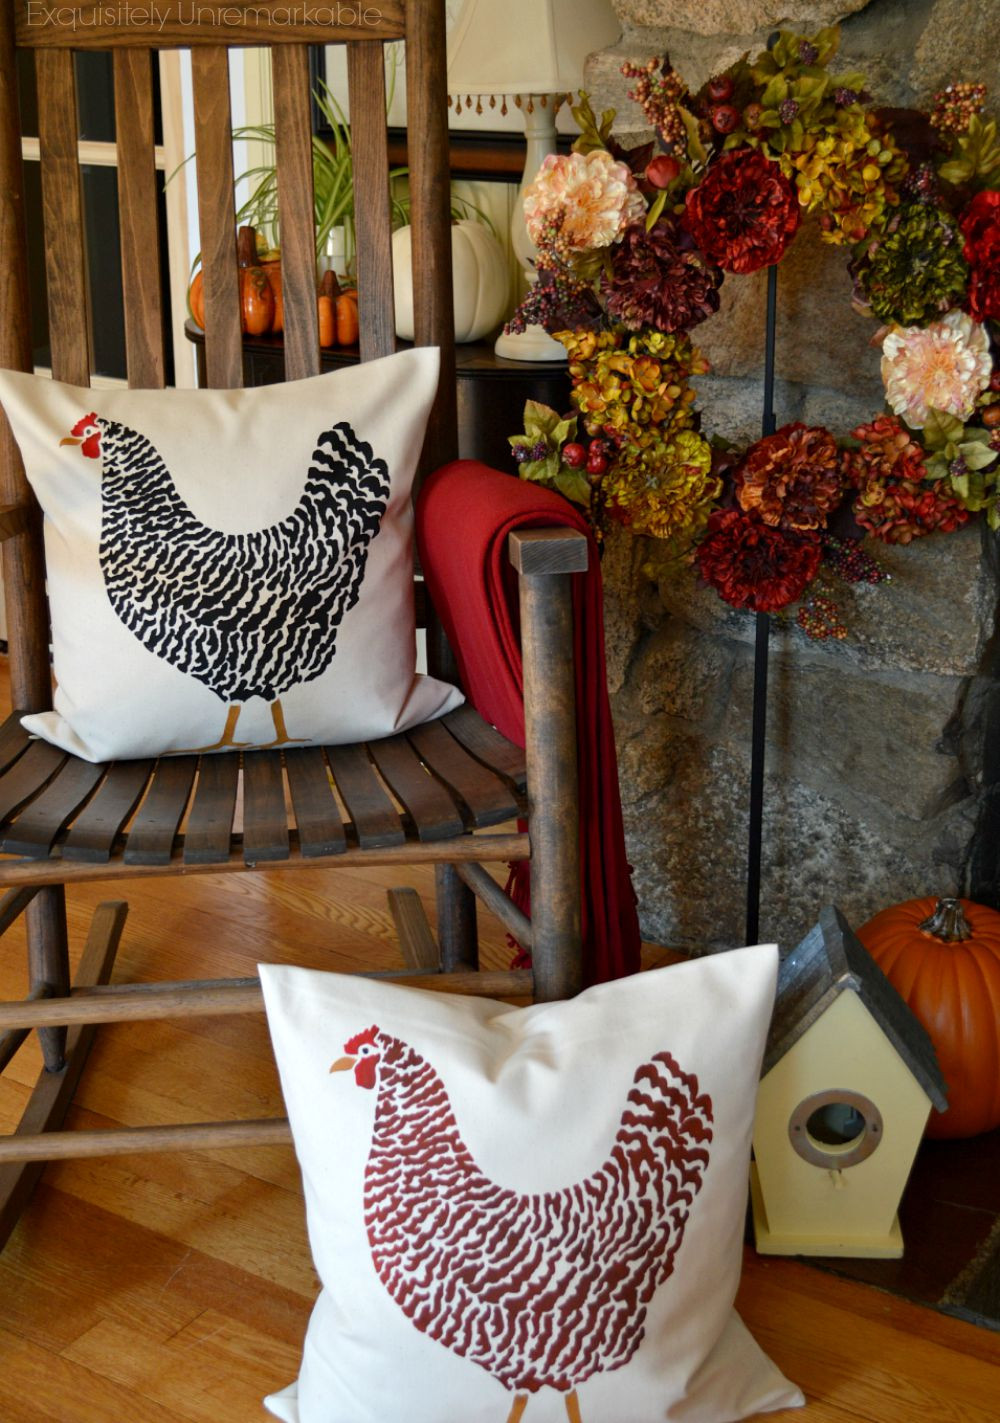 DIY Decor Pillows
 DIY Stenciled Rooster Pillow Exquisitely Unremarkable